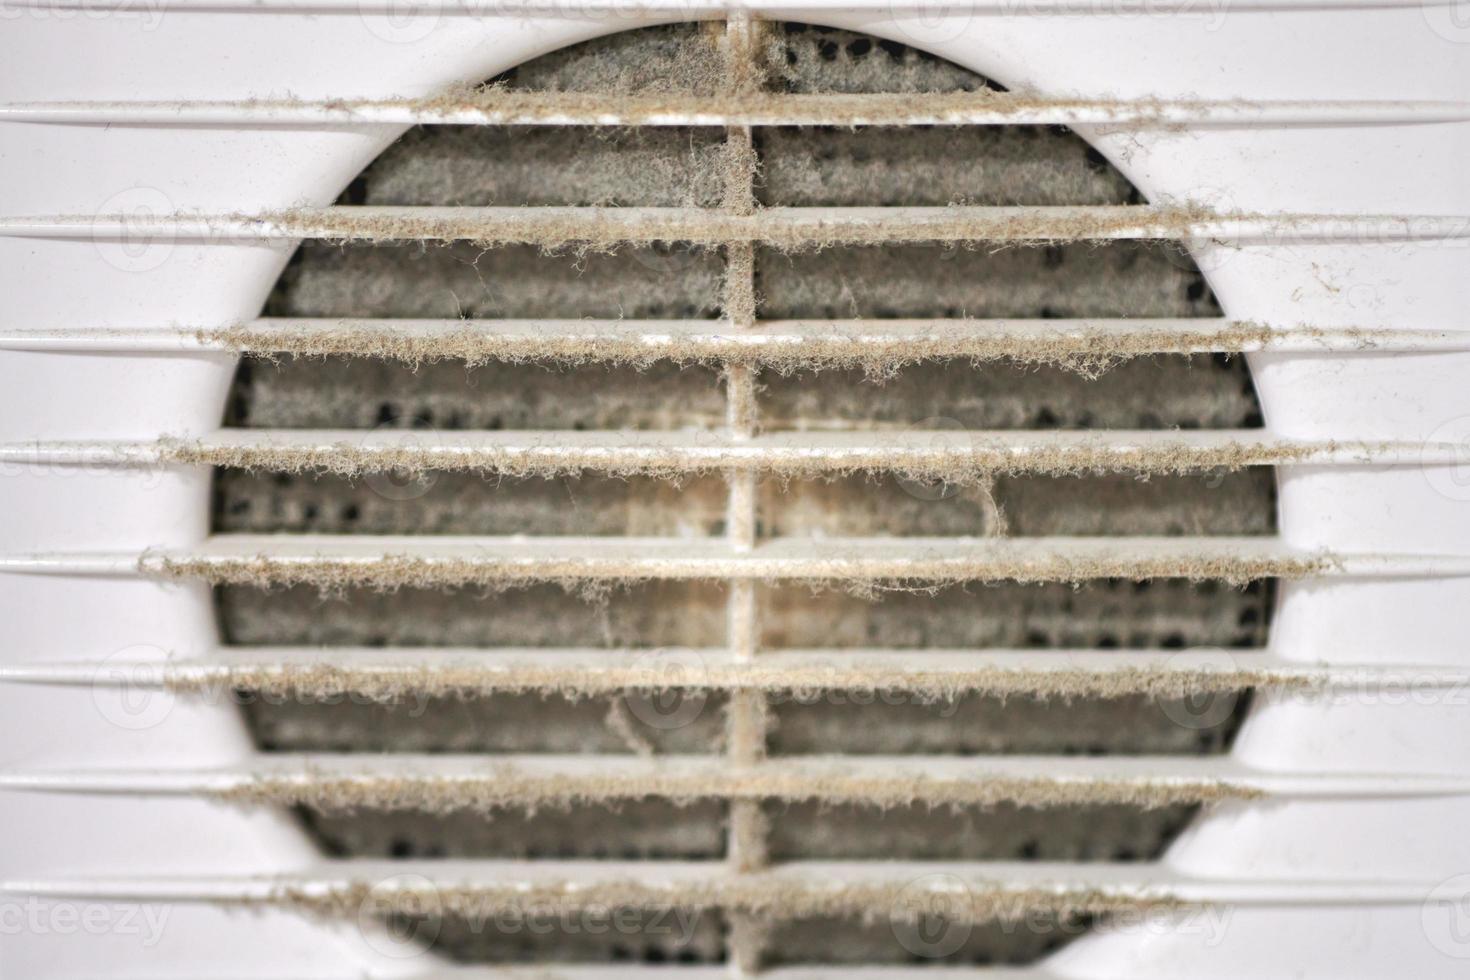 Dirty air ventilation grill of HVAC with clogged filter. photo